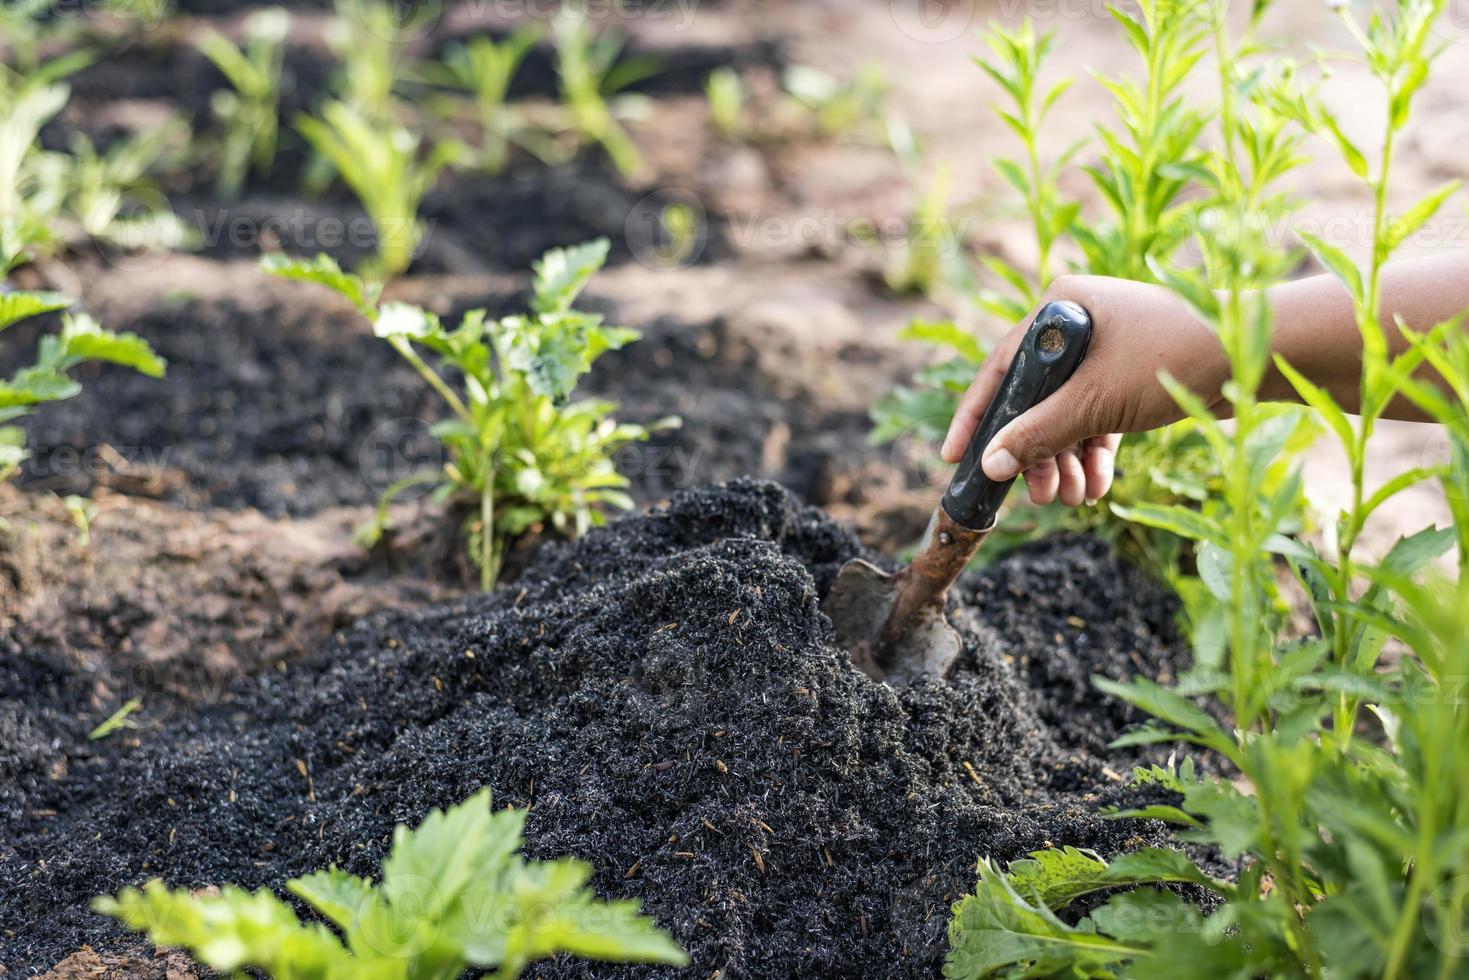 Cultivation, gardening, agriculture and people concepts - people with shovels digging garden beds or farms. photo